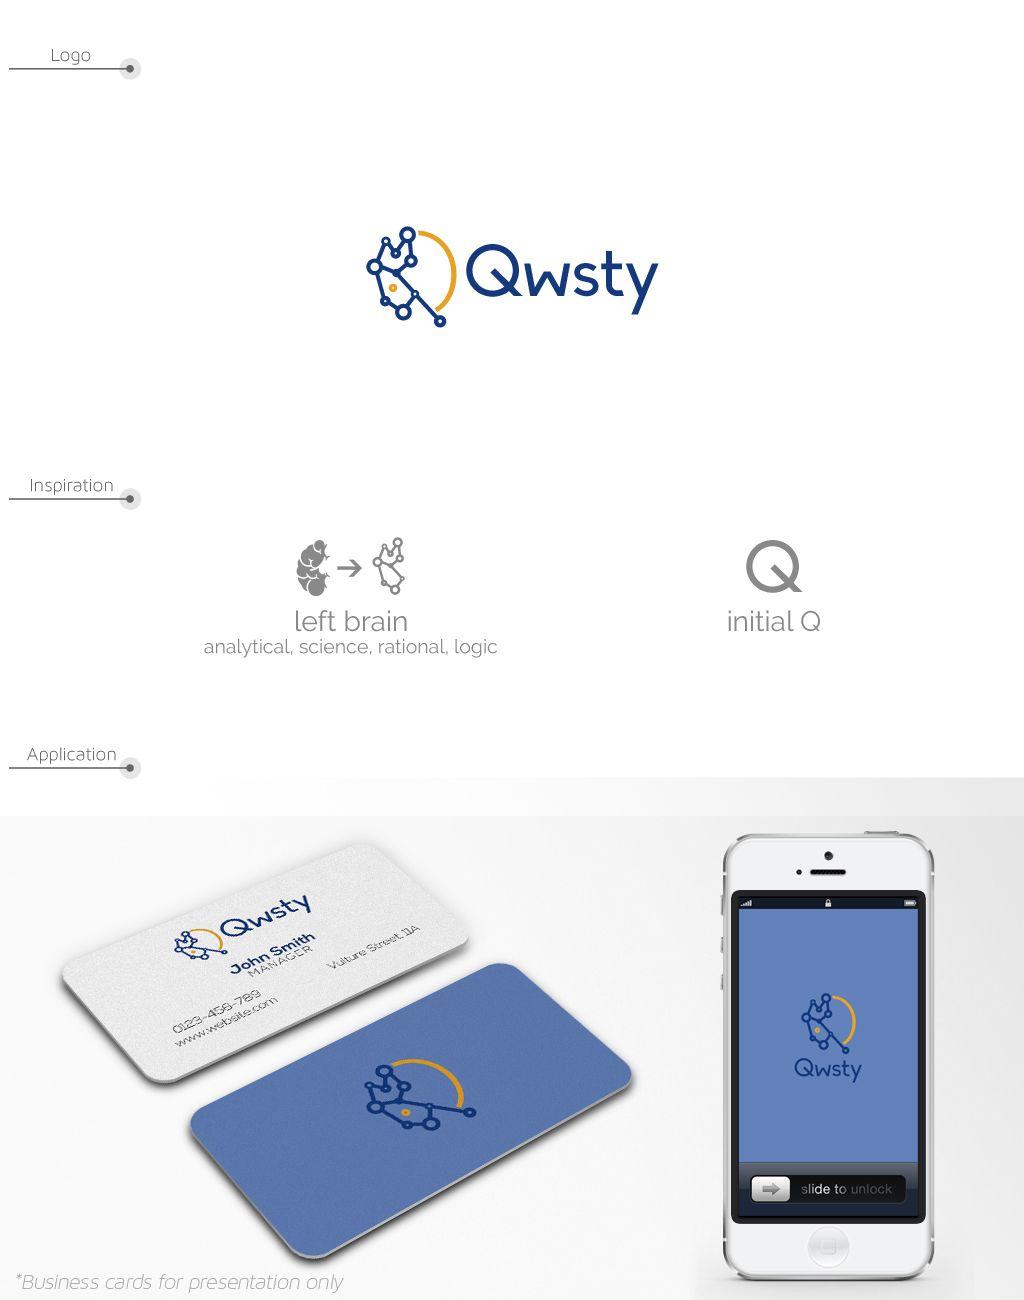 Electronic Education Logo - Bold, Modern, Education Logo Design for Qwsty by JohnM. Design